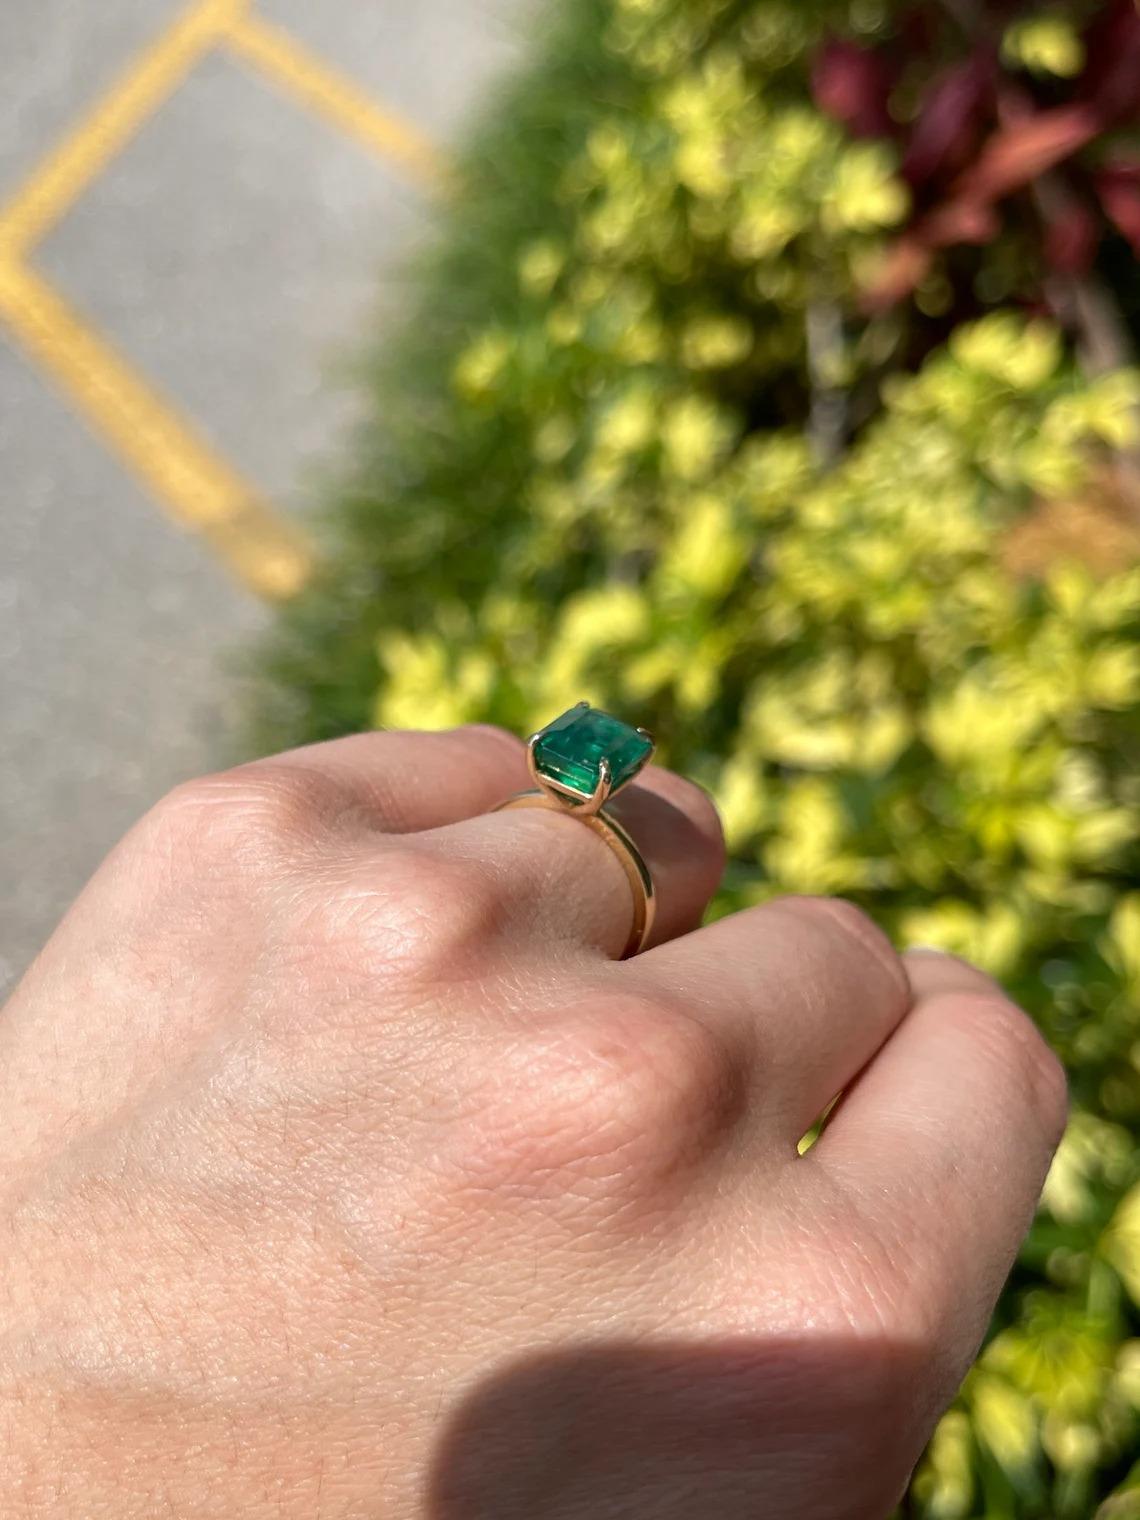 natural emerald solitaire ring